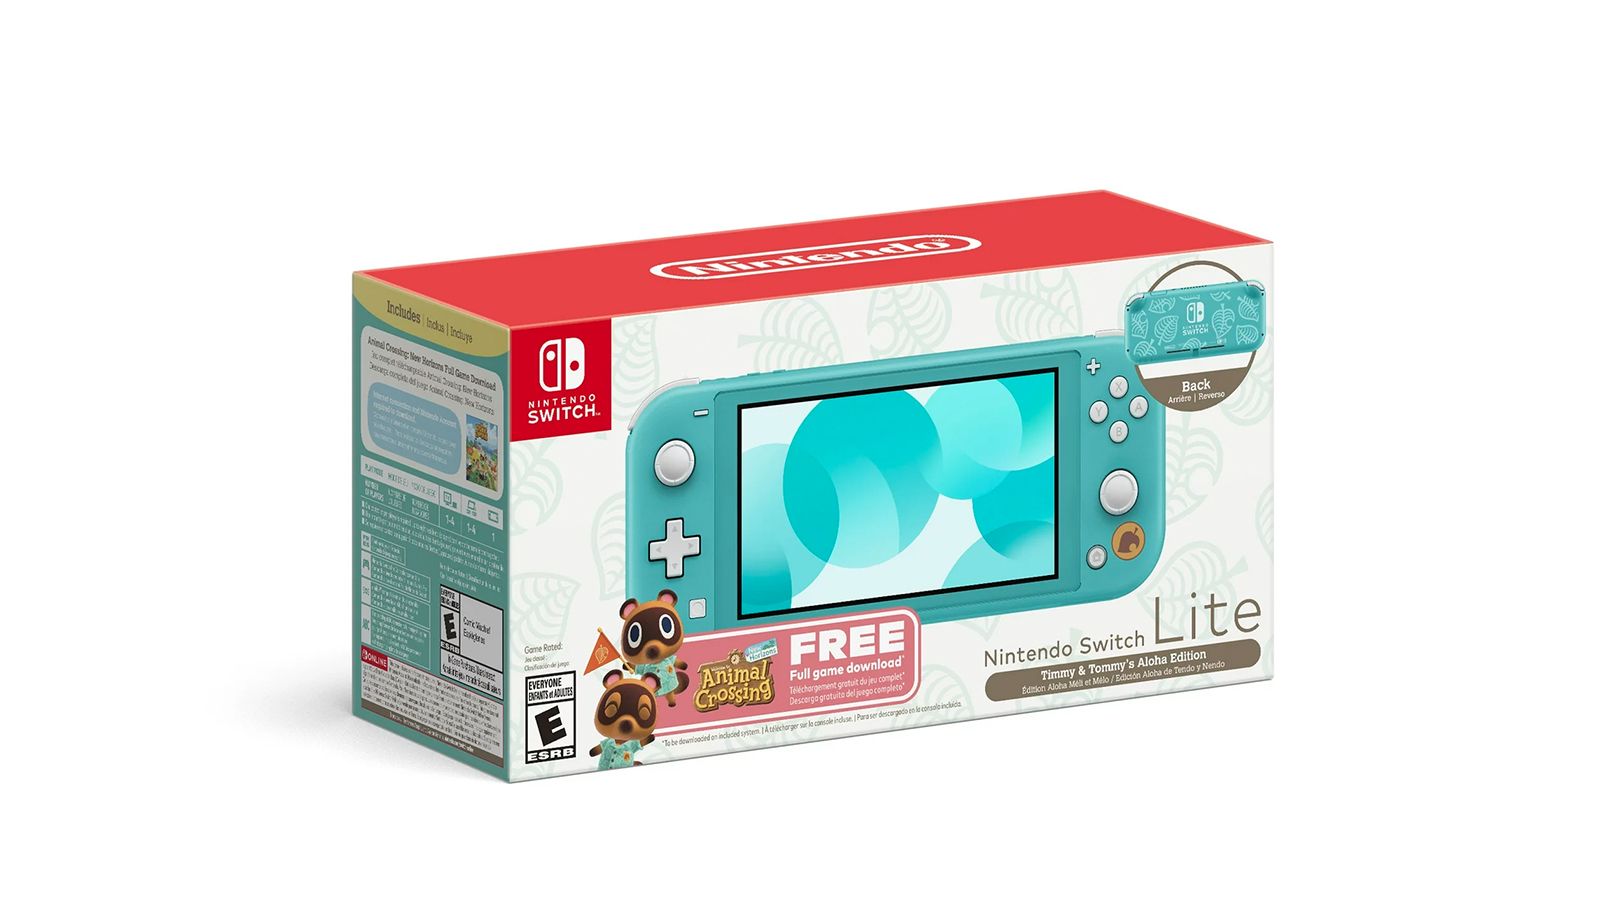 Save $60 on a Nintendo Switch Lite bundle with Walmart's Cyber Monday deal